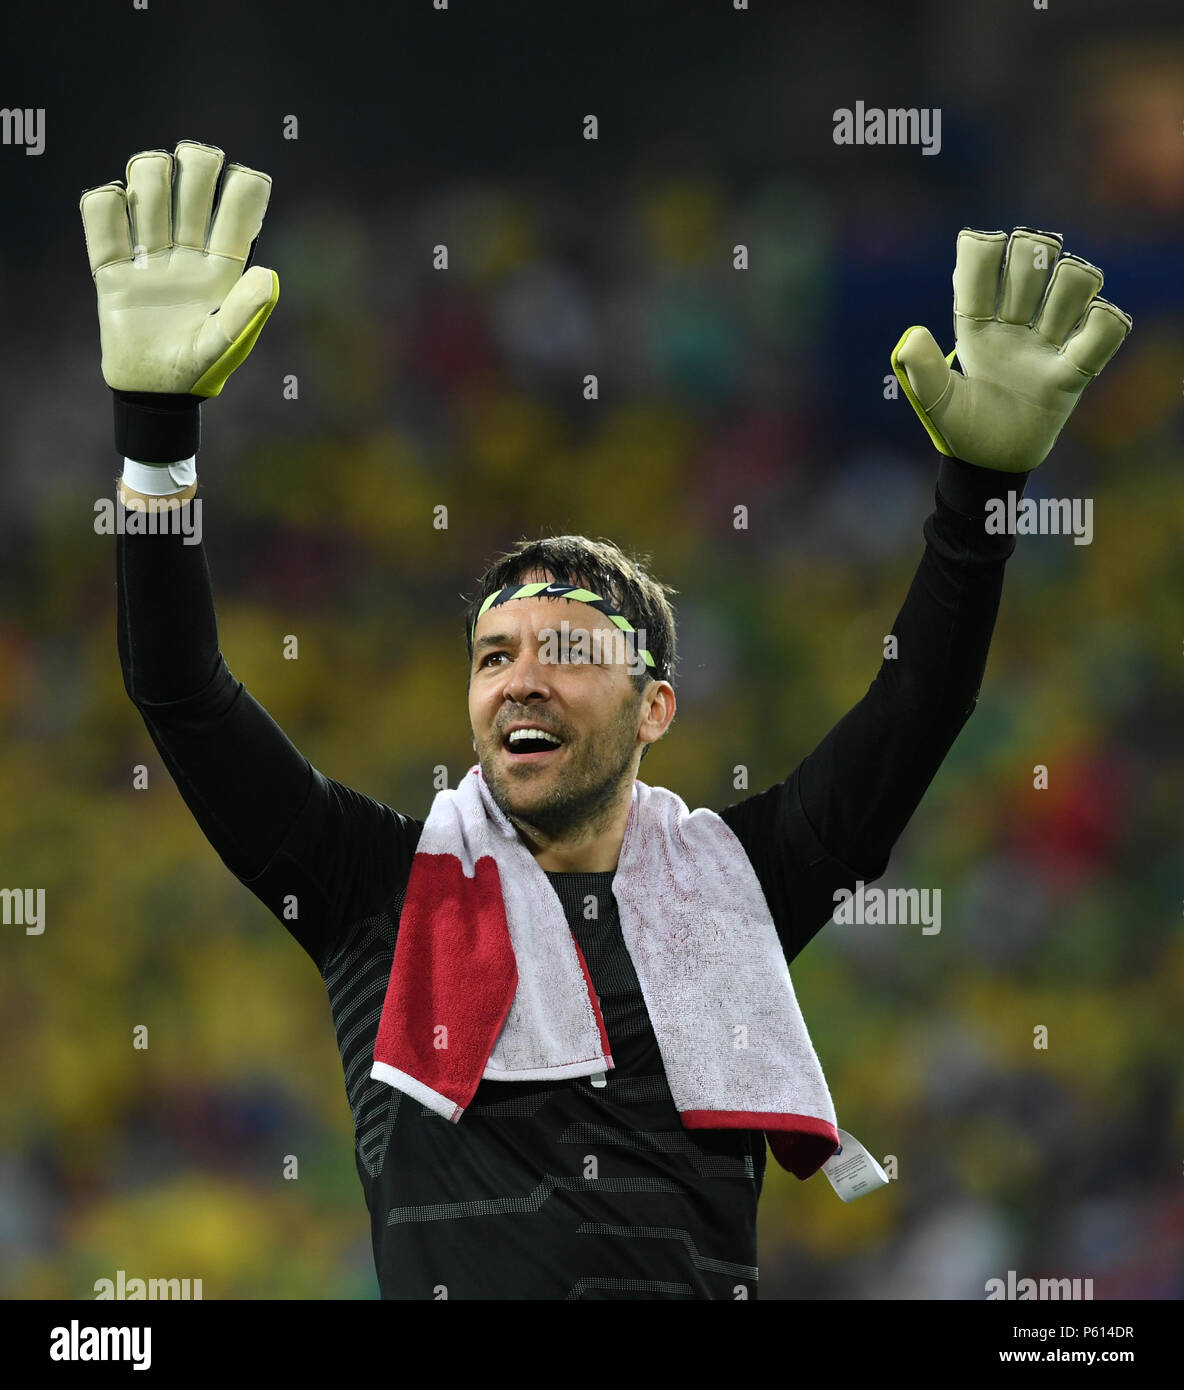 Moscow, Russia. 27th June, 2018. Goalkeeper Vladimir Stojkovic of Serbia greets the audience after the 2018 FIFA World Cup Group E match between Brazil and Serbia in Moscow, Russia, June 27, 2018. Brazil won 2-0 and advanced to the round of 16. Credit: Du Yu/Xinhua/Alamy Live News Stock Photo